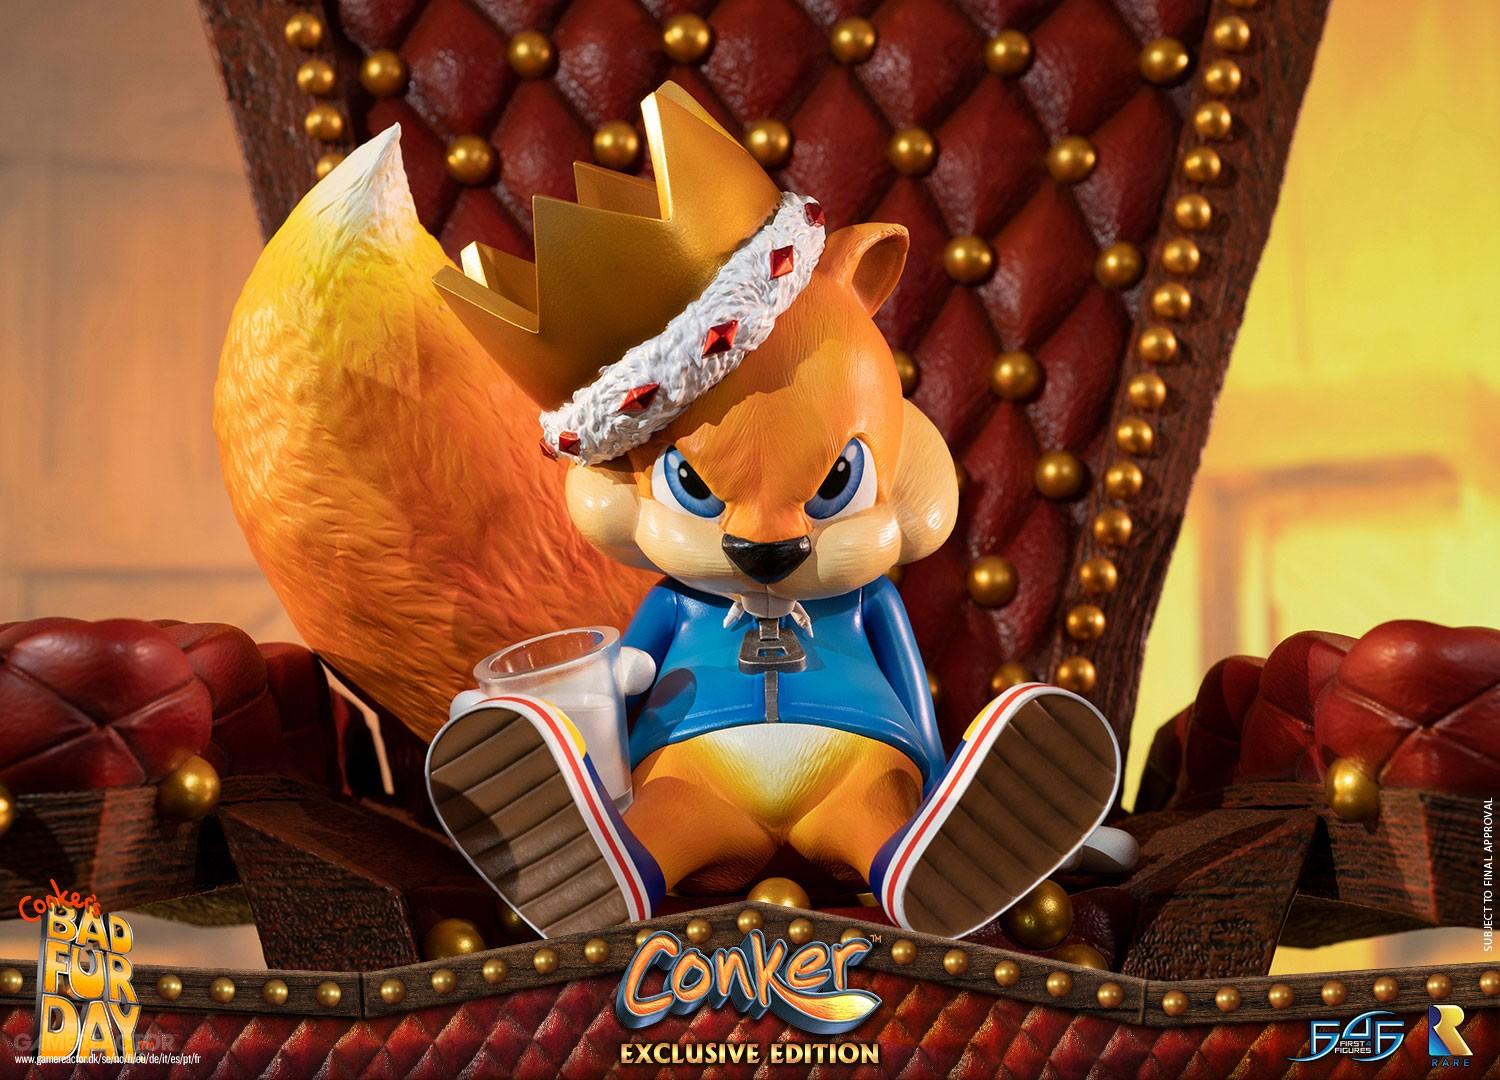 Equally Stunning And Pricey Conker Statue Up For Pre Order: Live & Reloaded